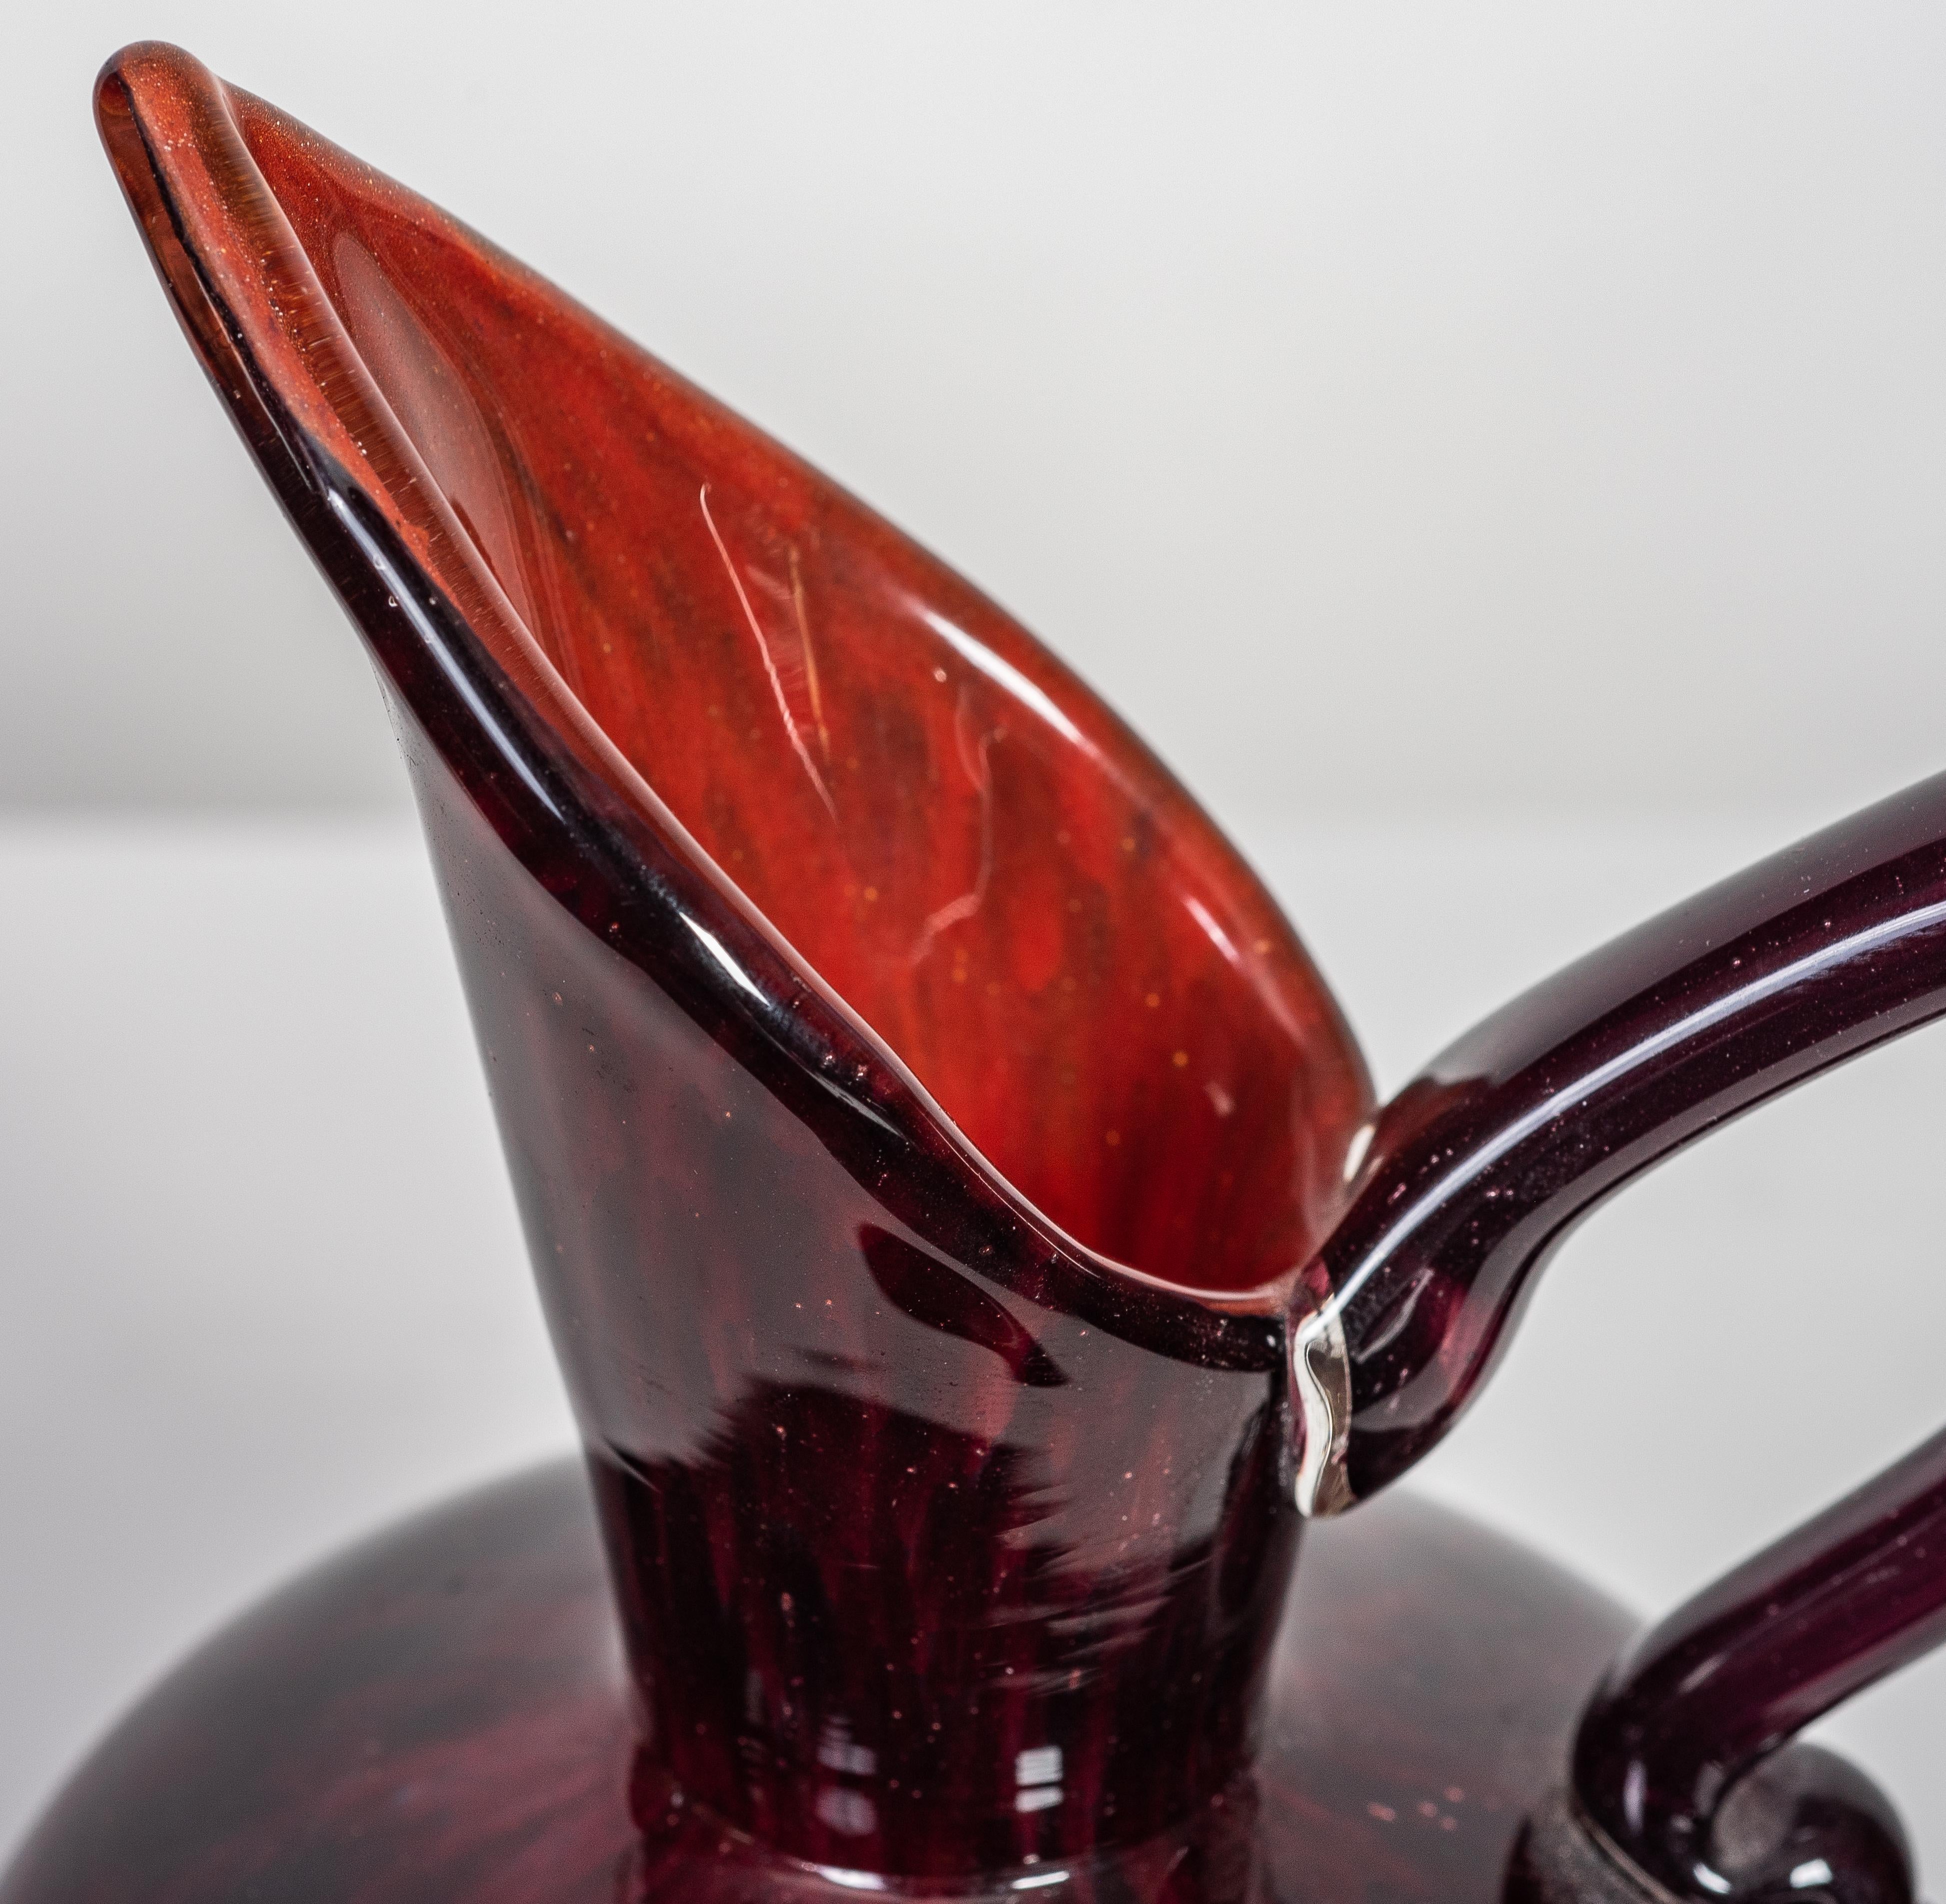 Charles Schneider (1881-1953)
Internally decorated glass jug with applied handle on a mottled red ground, circa 1924-1925, etched signature Schneider
Dimensions 
Height 
6.5 in. (16.5 cm) 
Width
4.5 in. (11.4 cm).